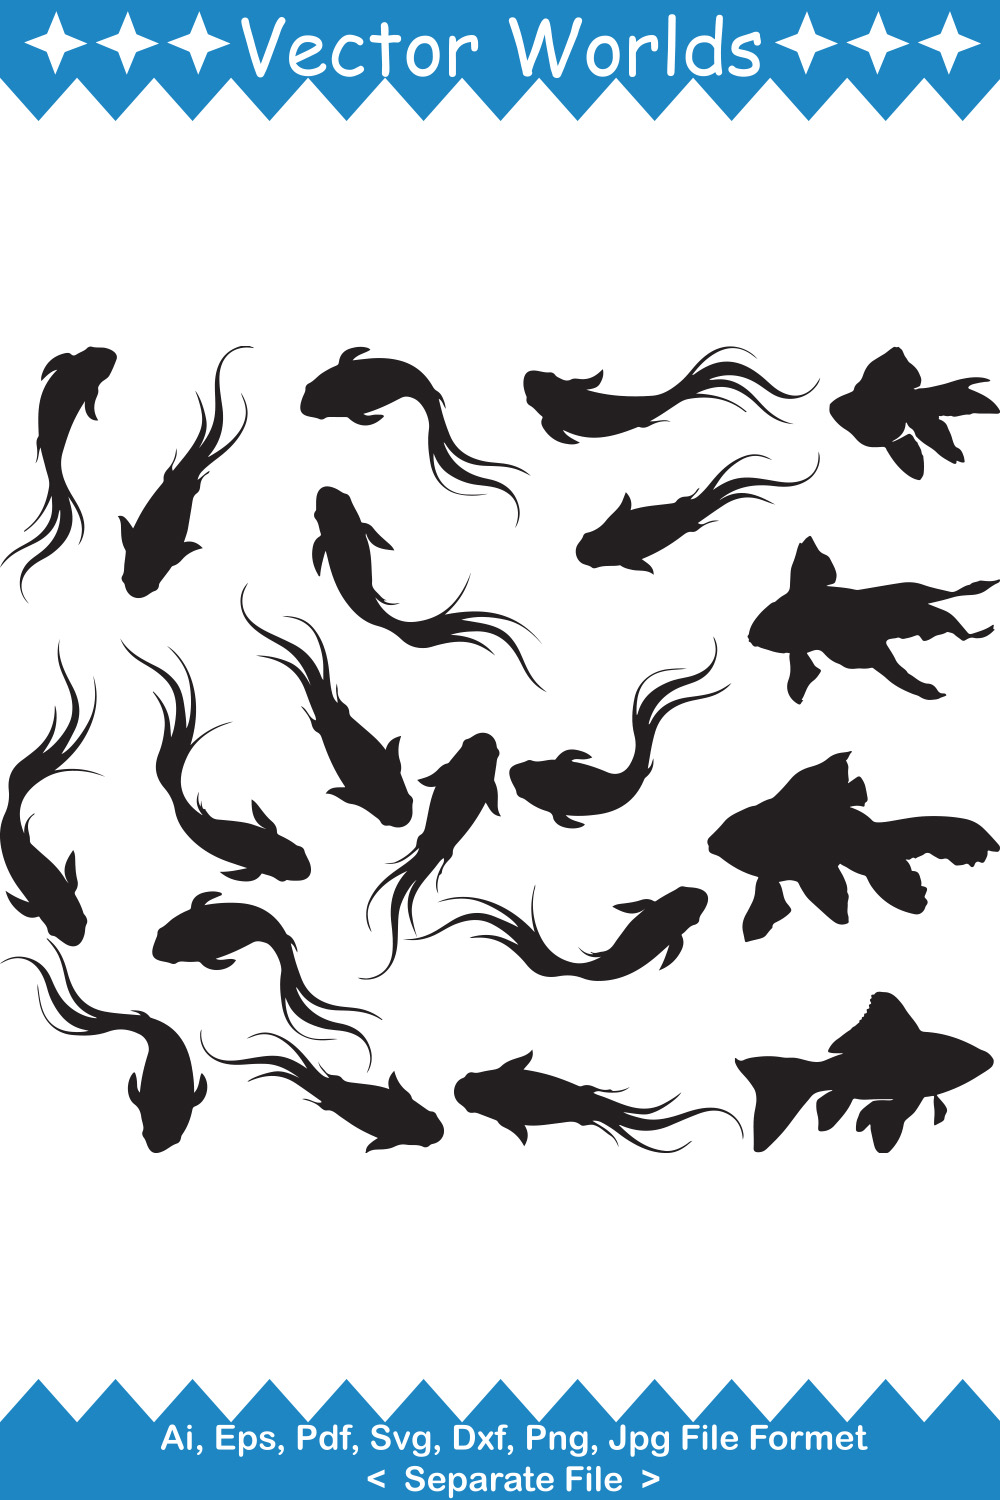 Large collection of fish silhouettes.